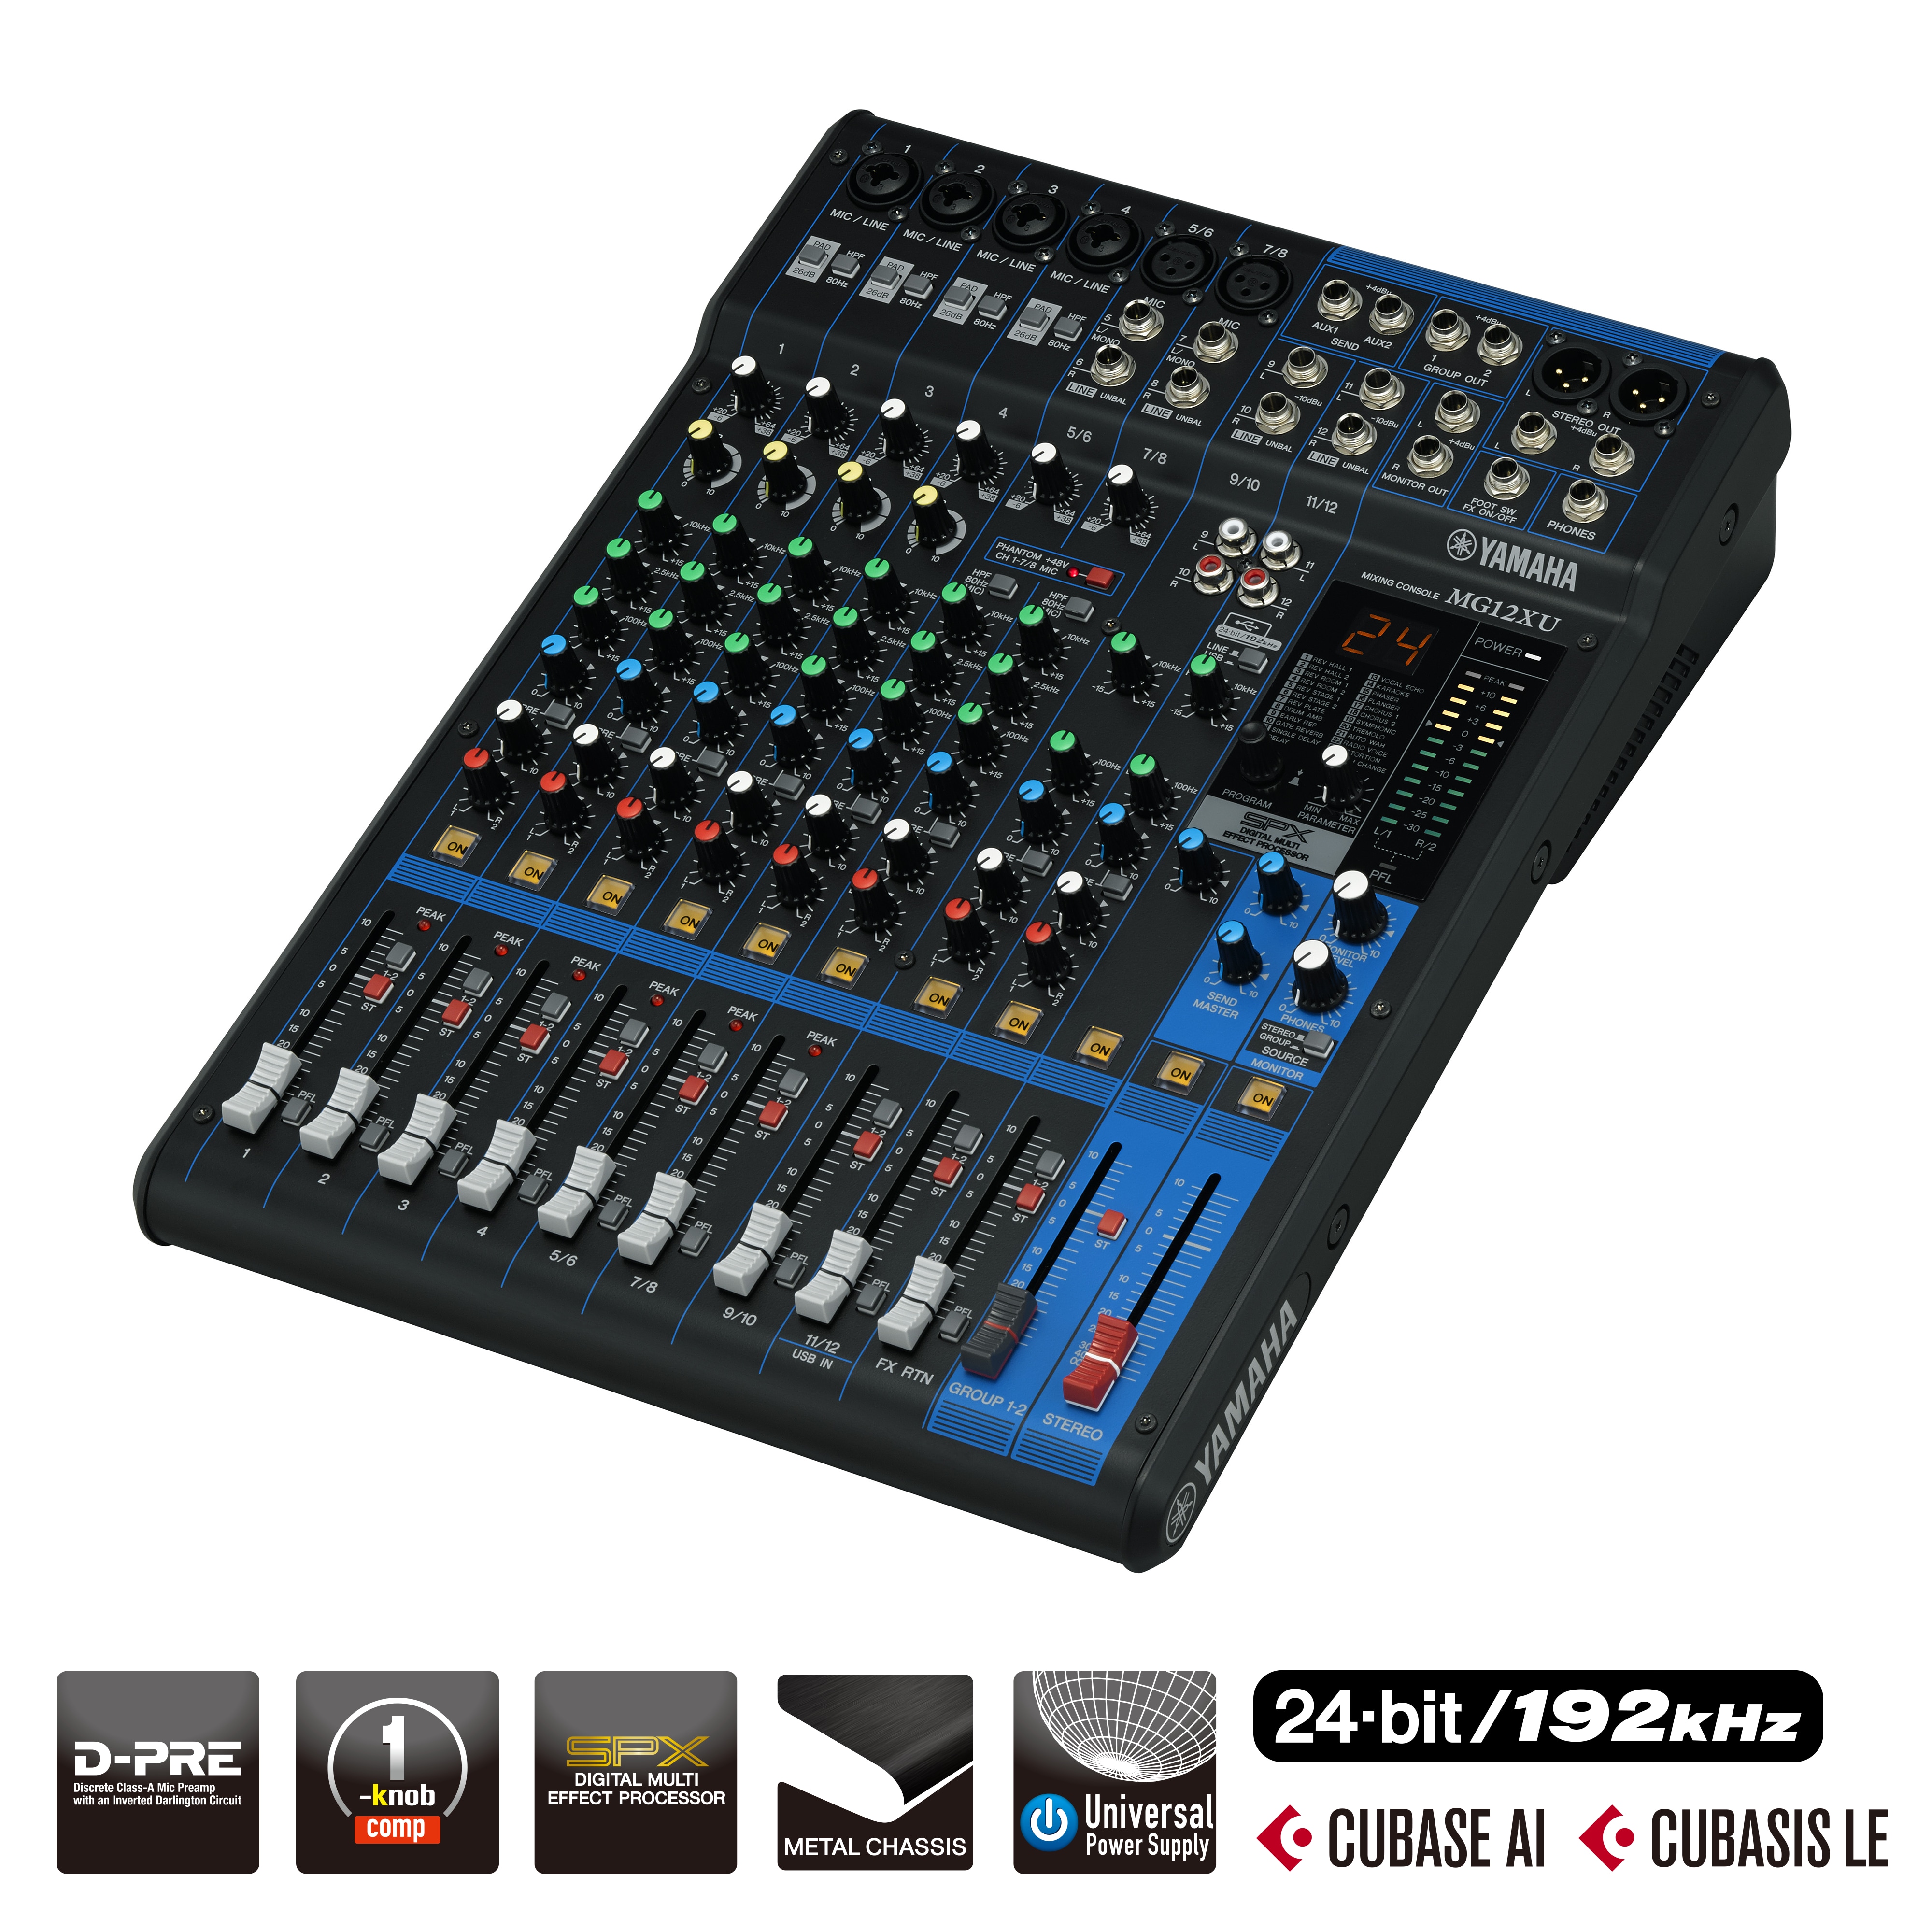 MG Series - Overview - Mixers - Professional Audio - Products - Yamaha -  Other European Countries